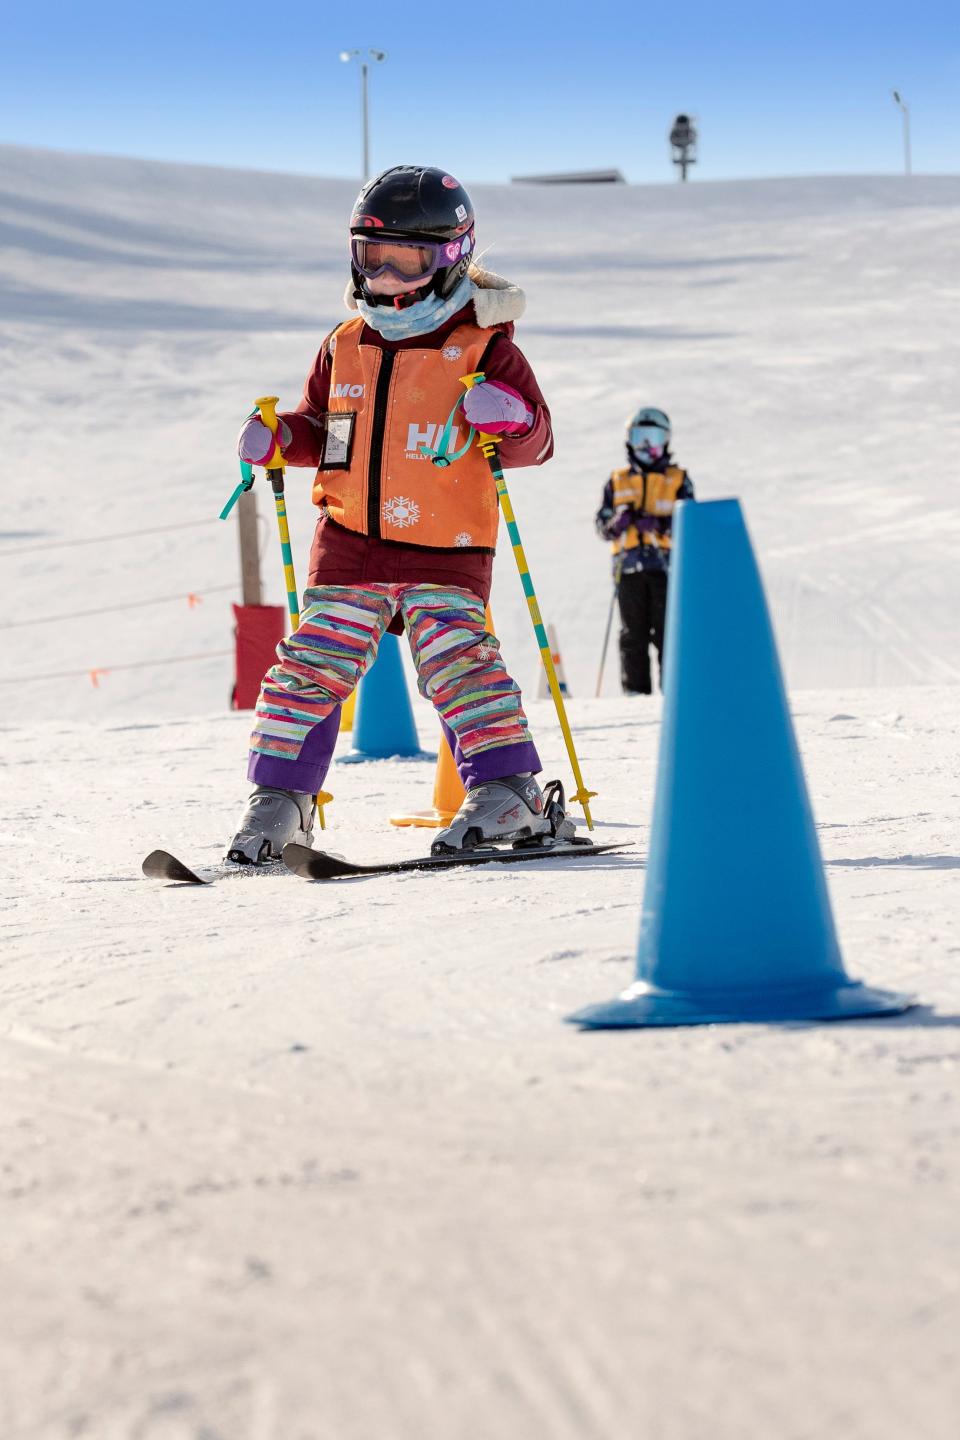 Wilmot Mountain in Kenosha County has a number of ski programs for kids as young as 3.